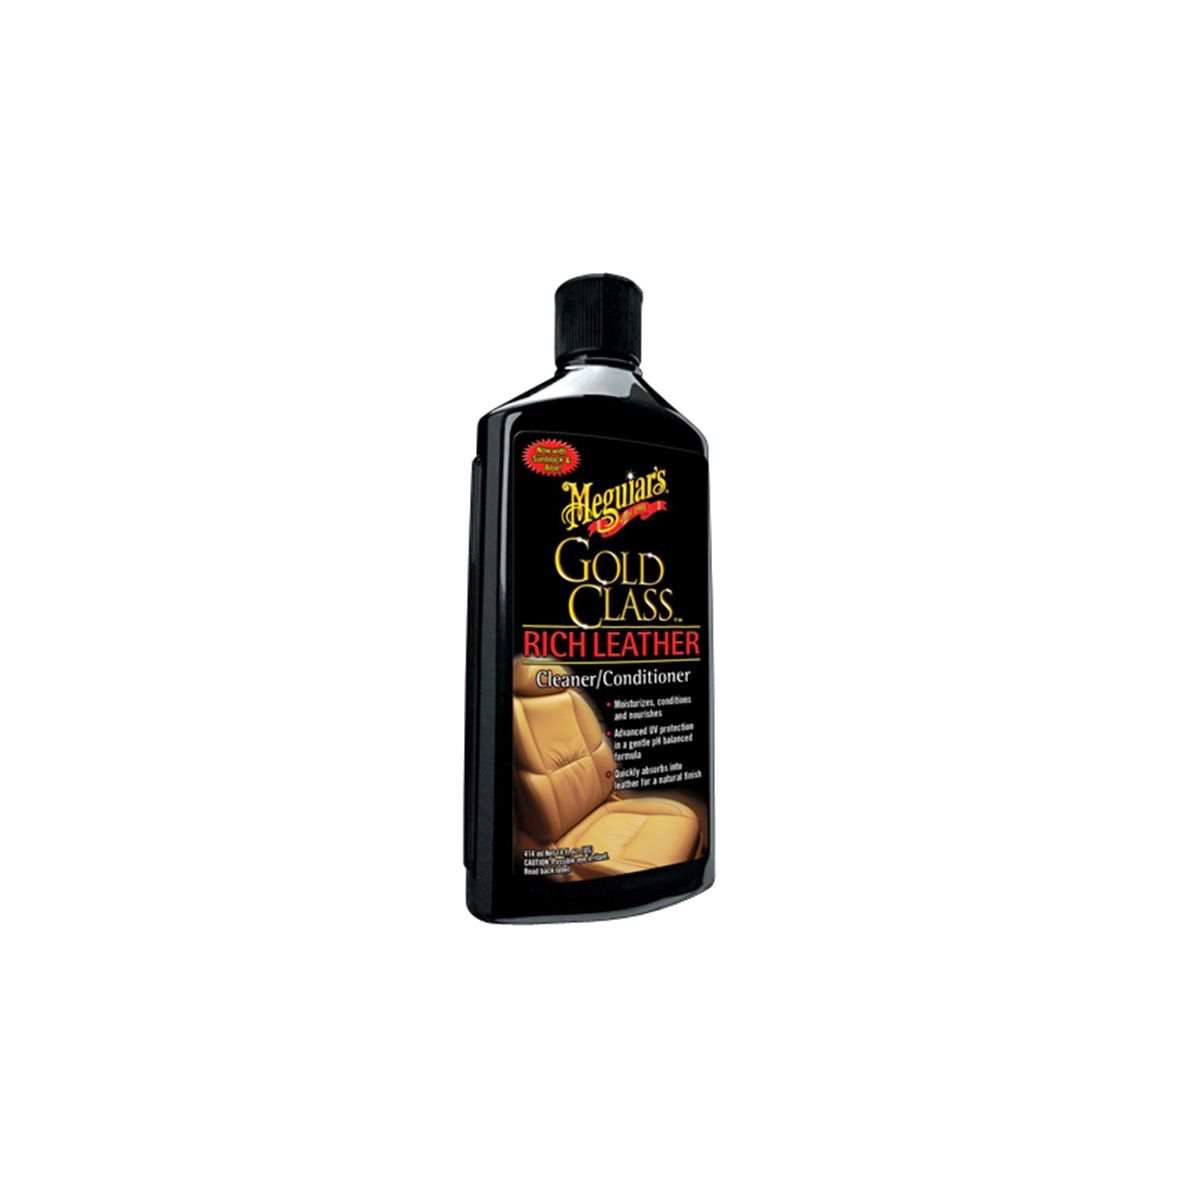 Meguiars Gold Class Leather Cleaner & Conditioner - 14 fl oz bottle